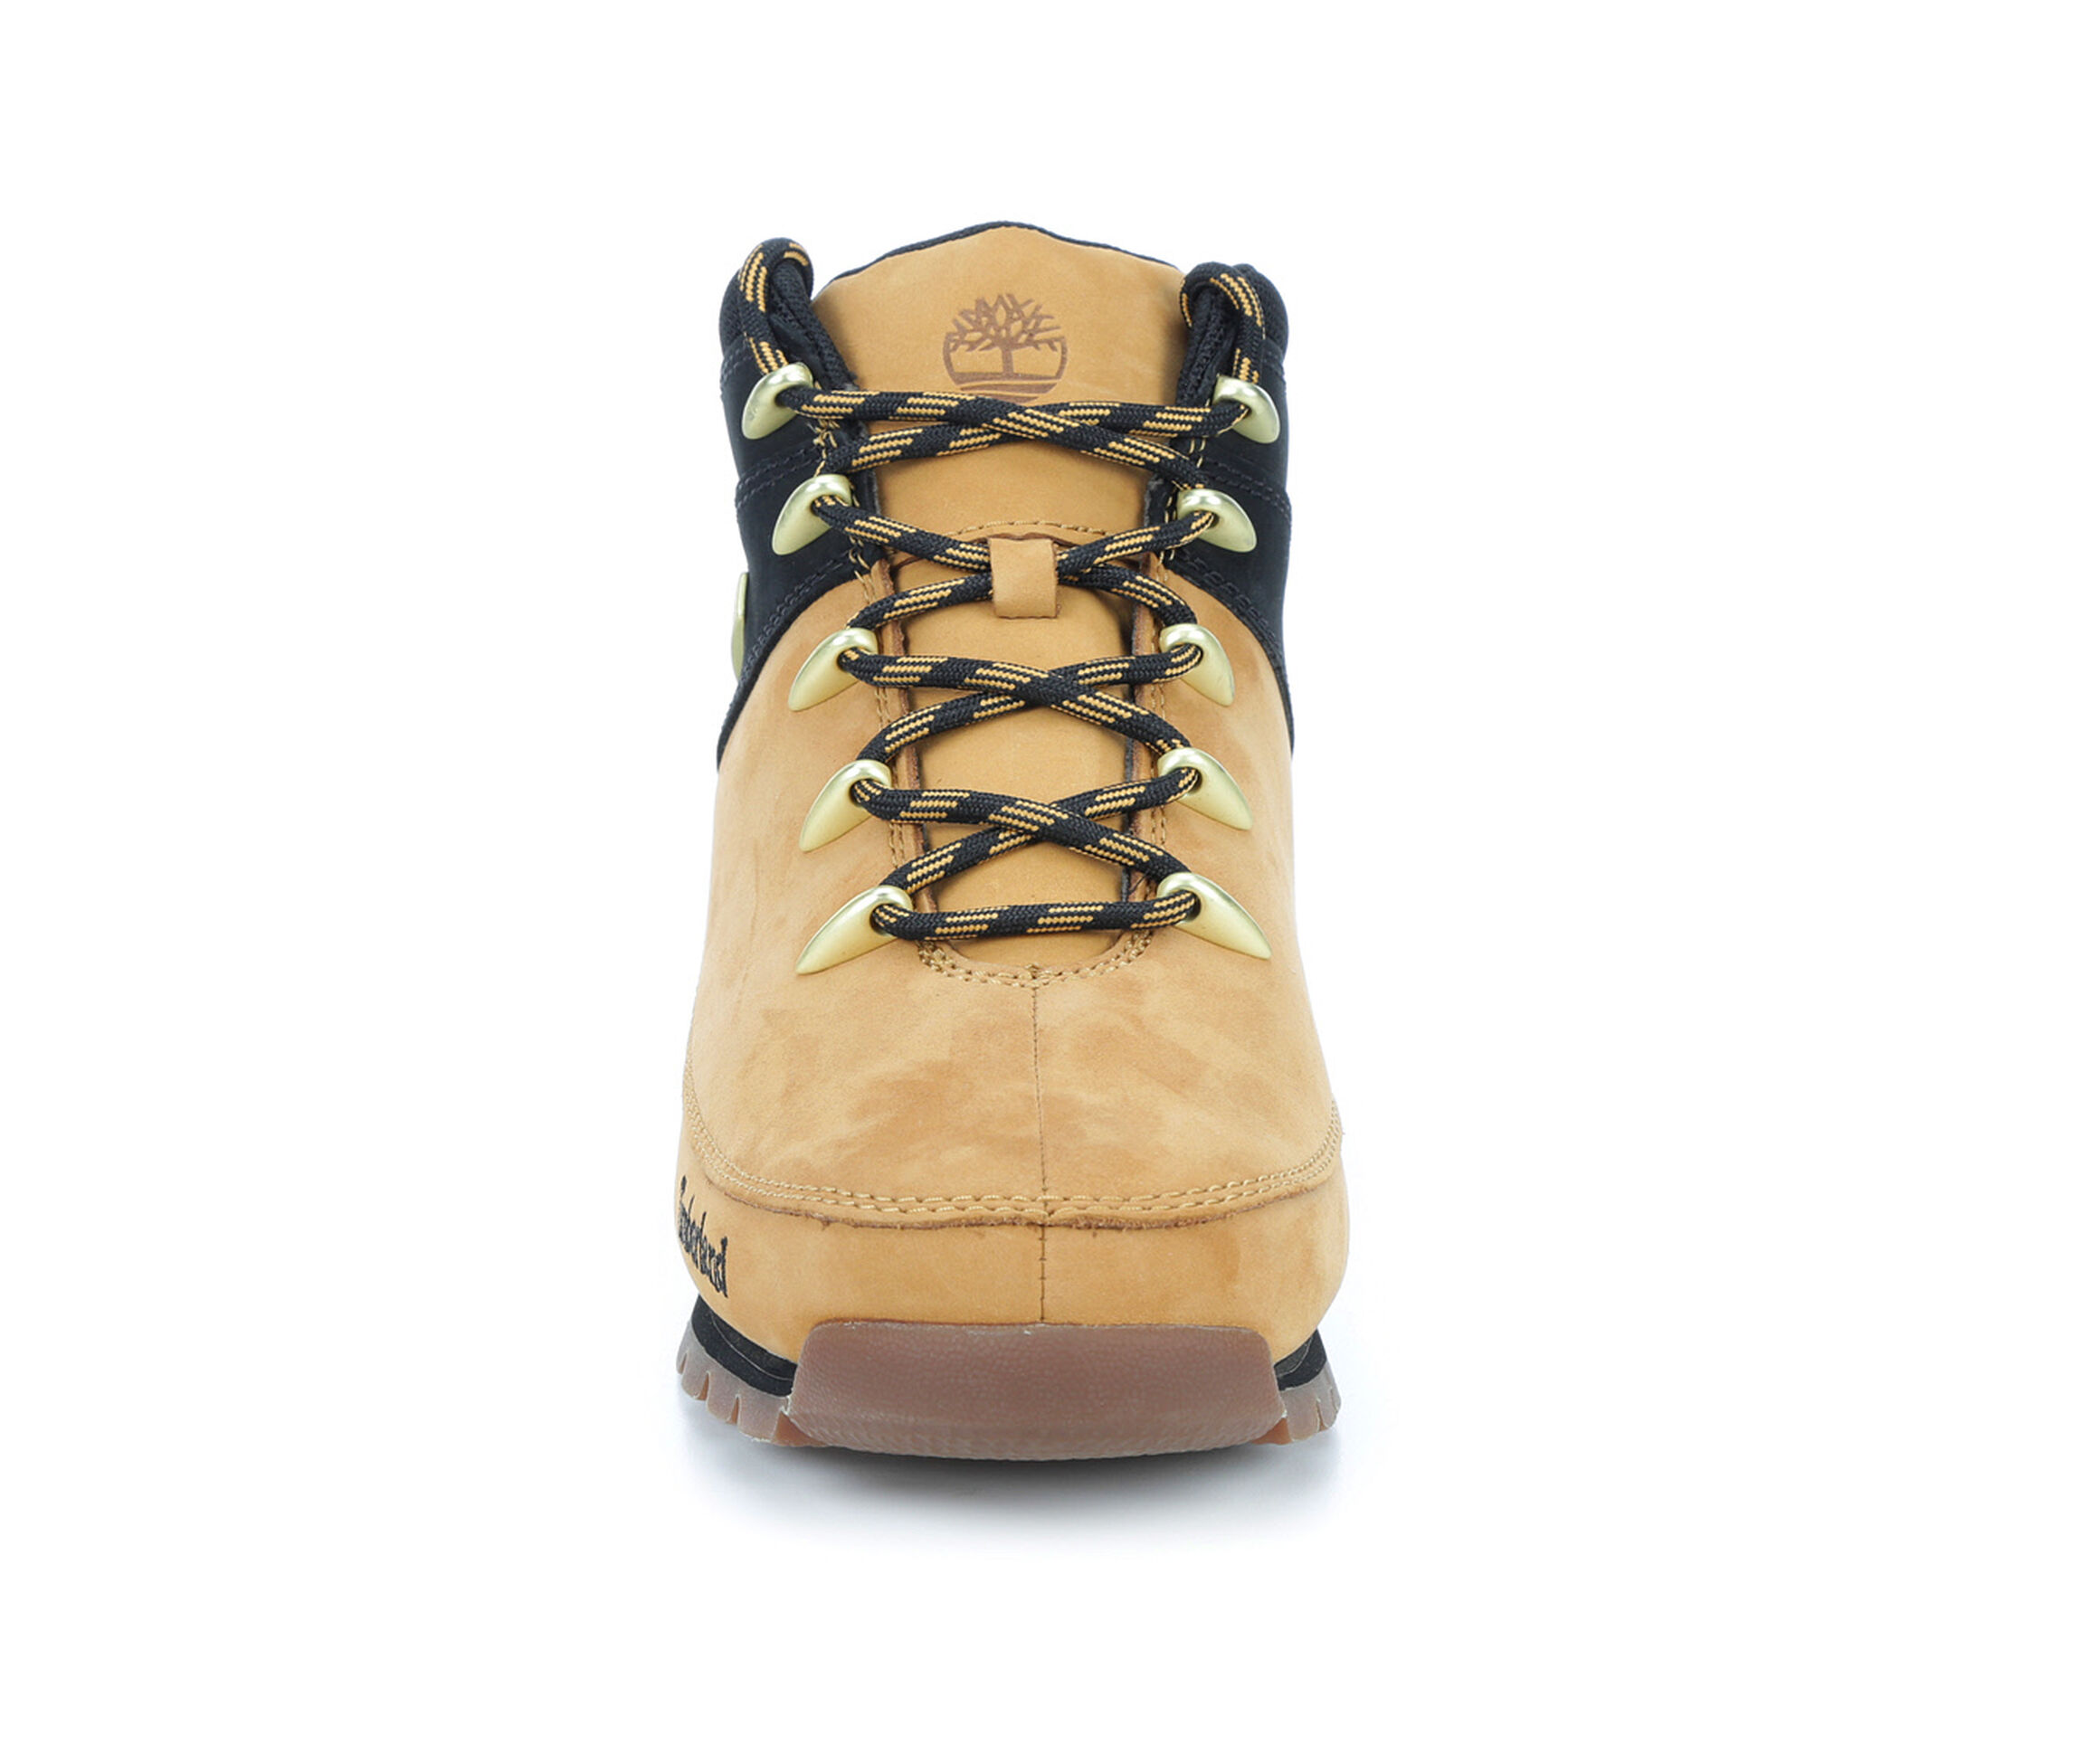 Men's Timberland Boots for Hiking | Shoe Carnival